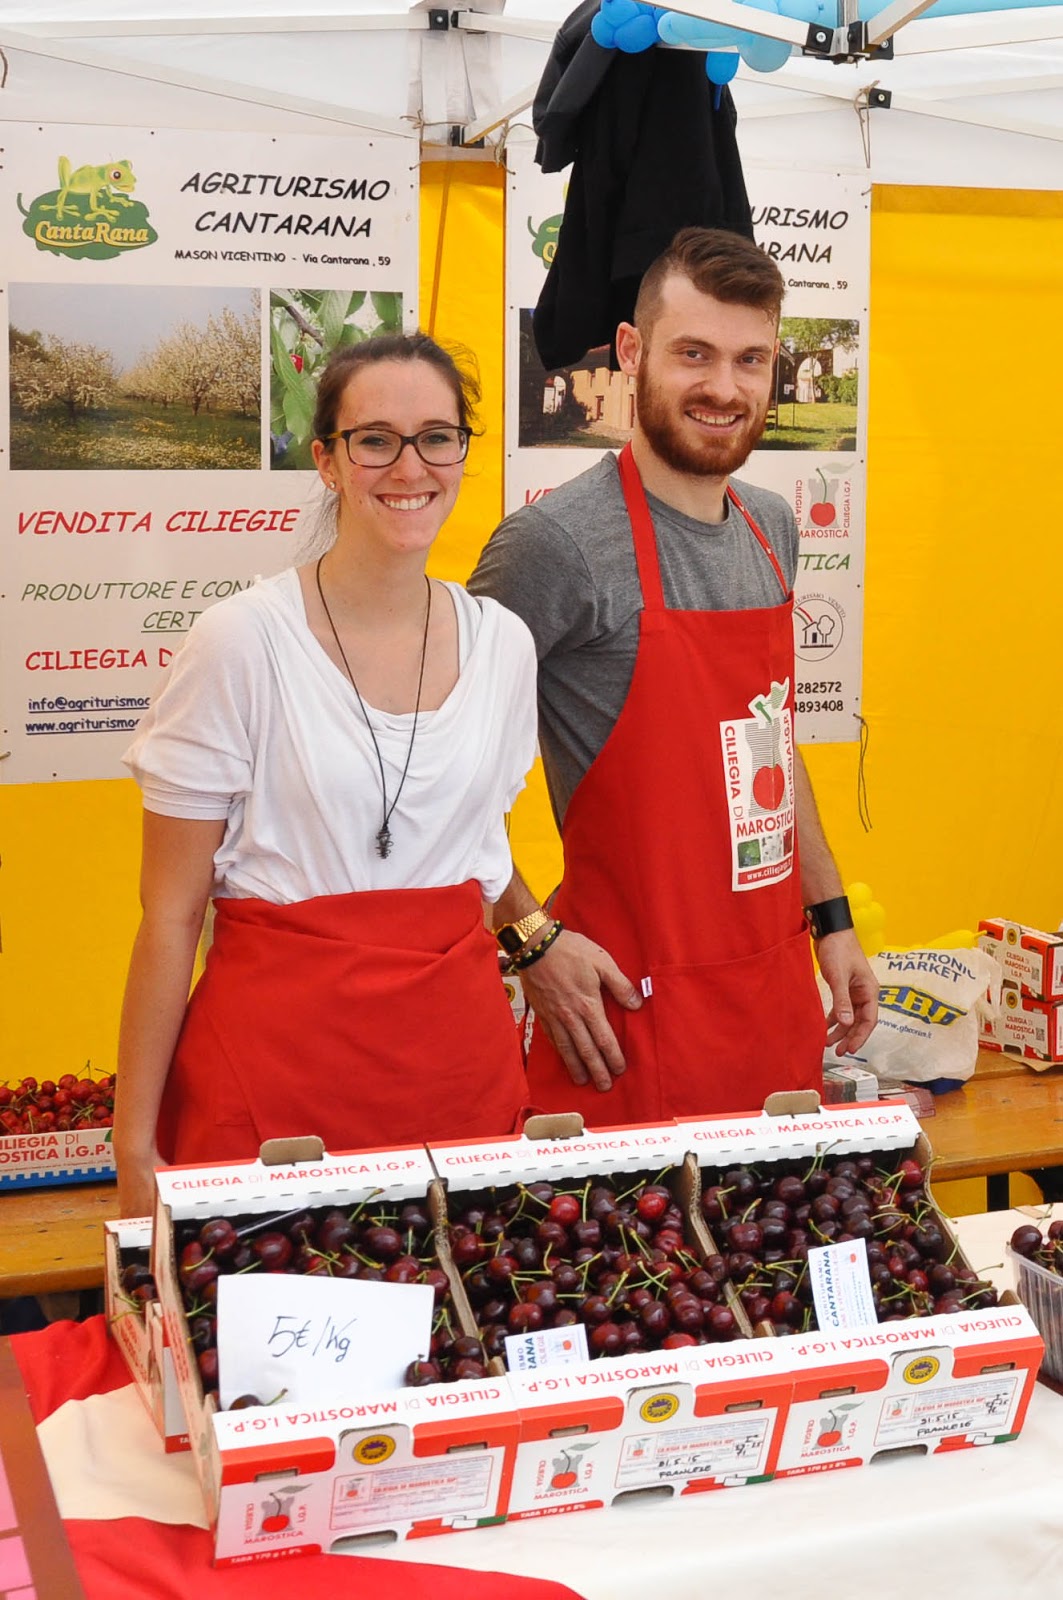 Agriturismo Cantarina at the Cherry Show Market in Marostica, Veneto, Italy